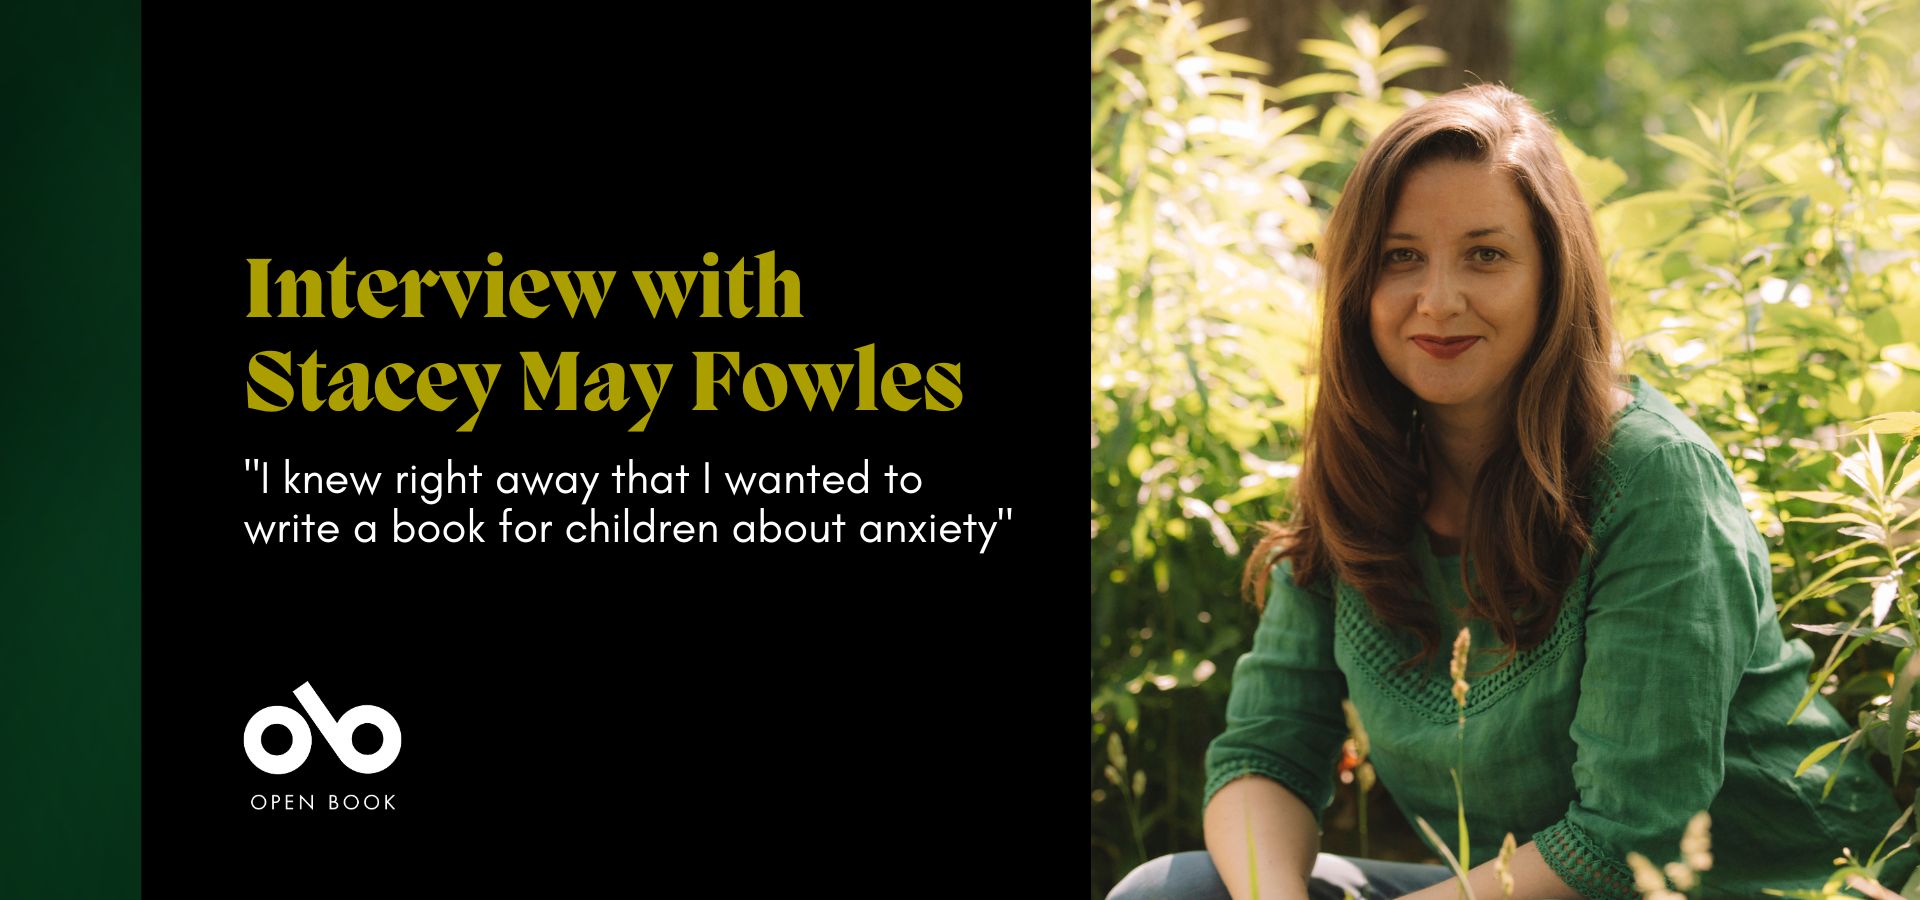 Black and green banner image with a photo of author Stacey May Fowles and the text "Interview with Stacey May Fowles.  knew right away that I wanted to write a book for children about anxiety"